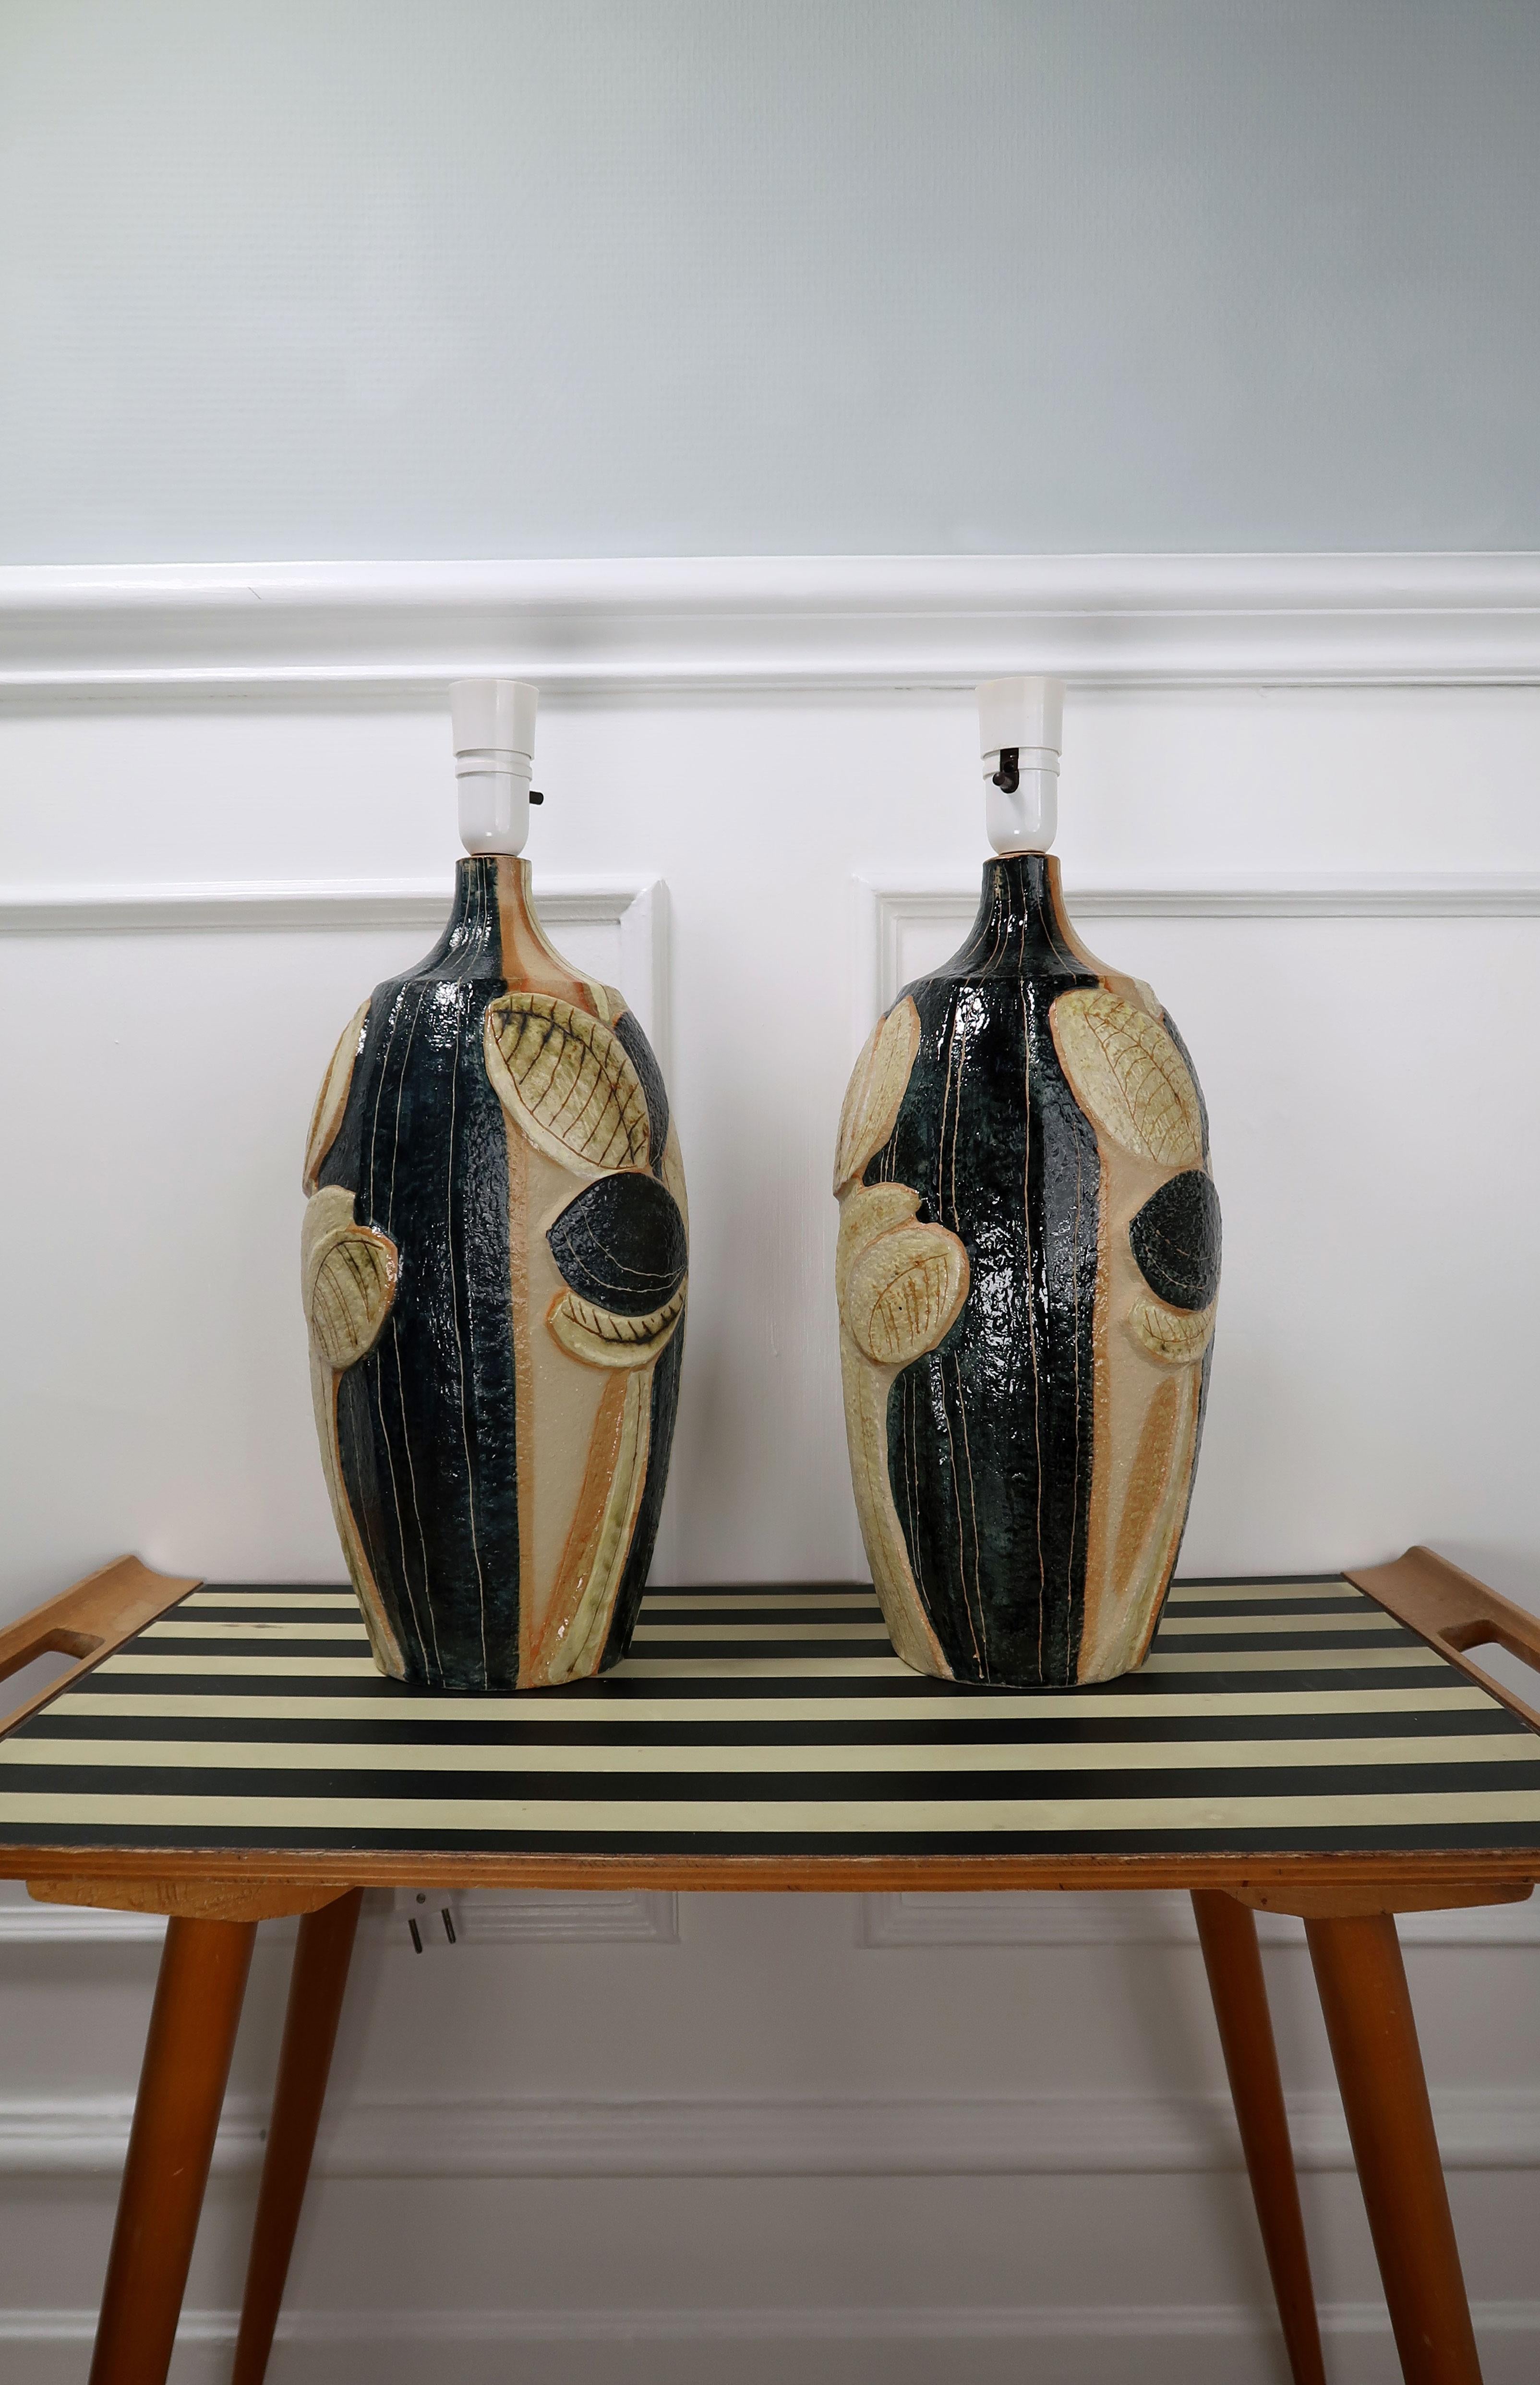 Stunning and rarely seen set of large Scandinavian Mid-Century Modern handmade stoneware table lamps by designer Noomi Backhausen for Danish Søholm Stentøj. Hand painted big graphic leaves on slender stems in shiny black, creamy yellow and warm